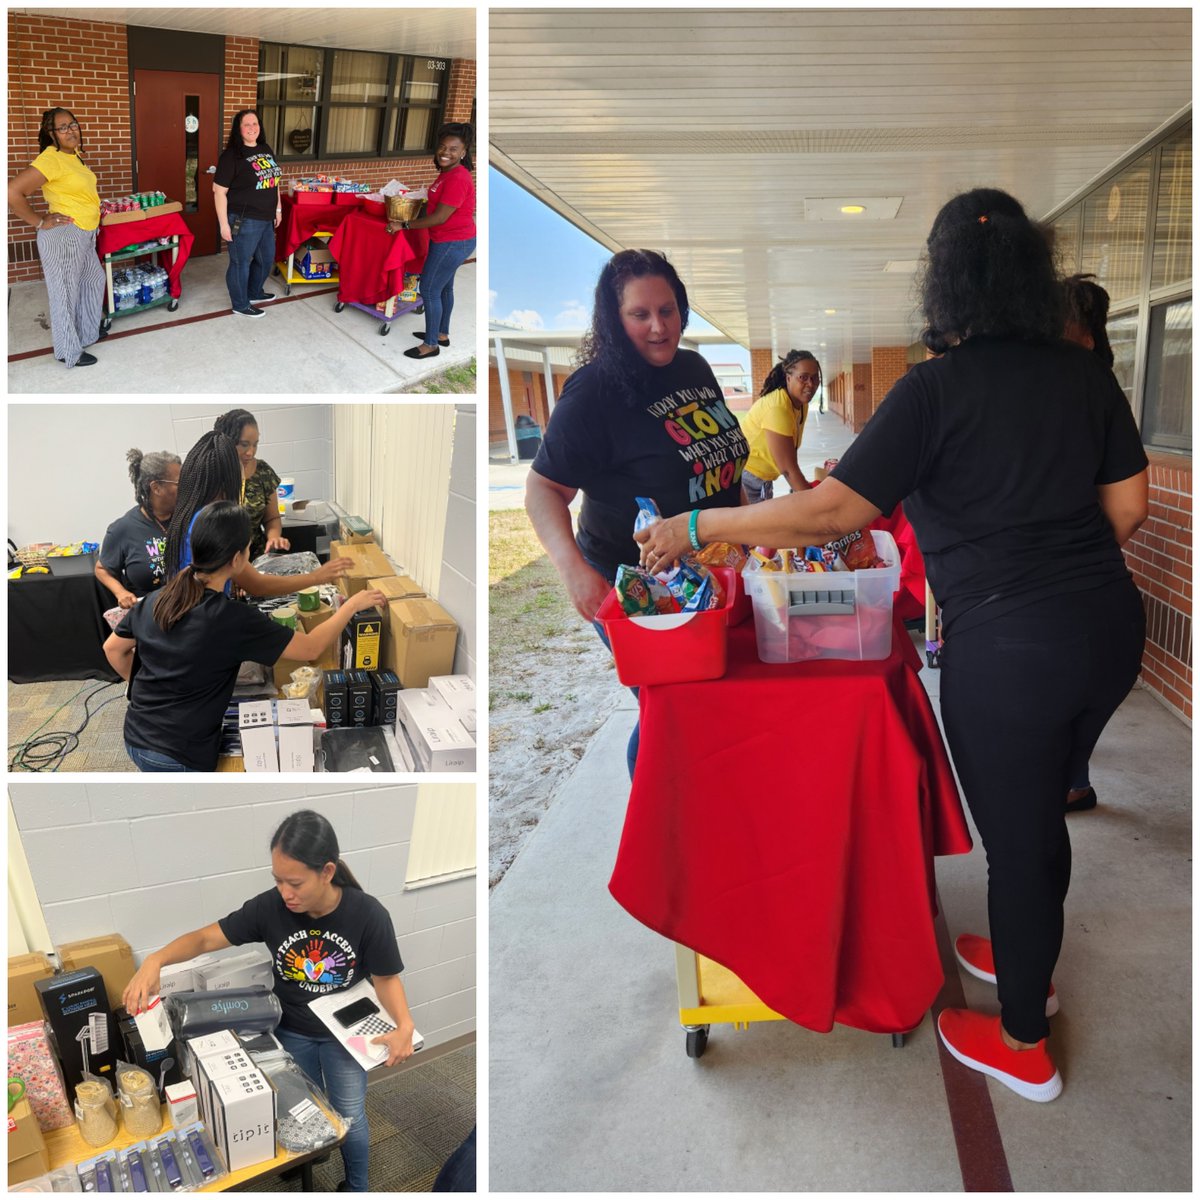 We are having so much fun showering our staff with love this week! Today, they received VIP room service, as well as started turning in their VIP raffle tickets for prizes. @Rose_A_Simon @LakeGemES_OCPS @DrRahim_Jones